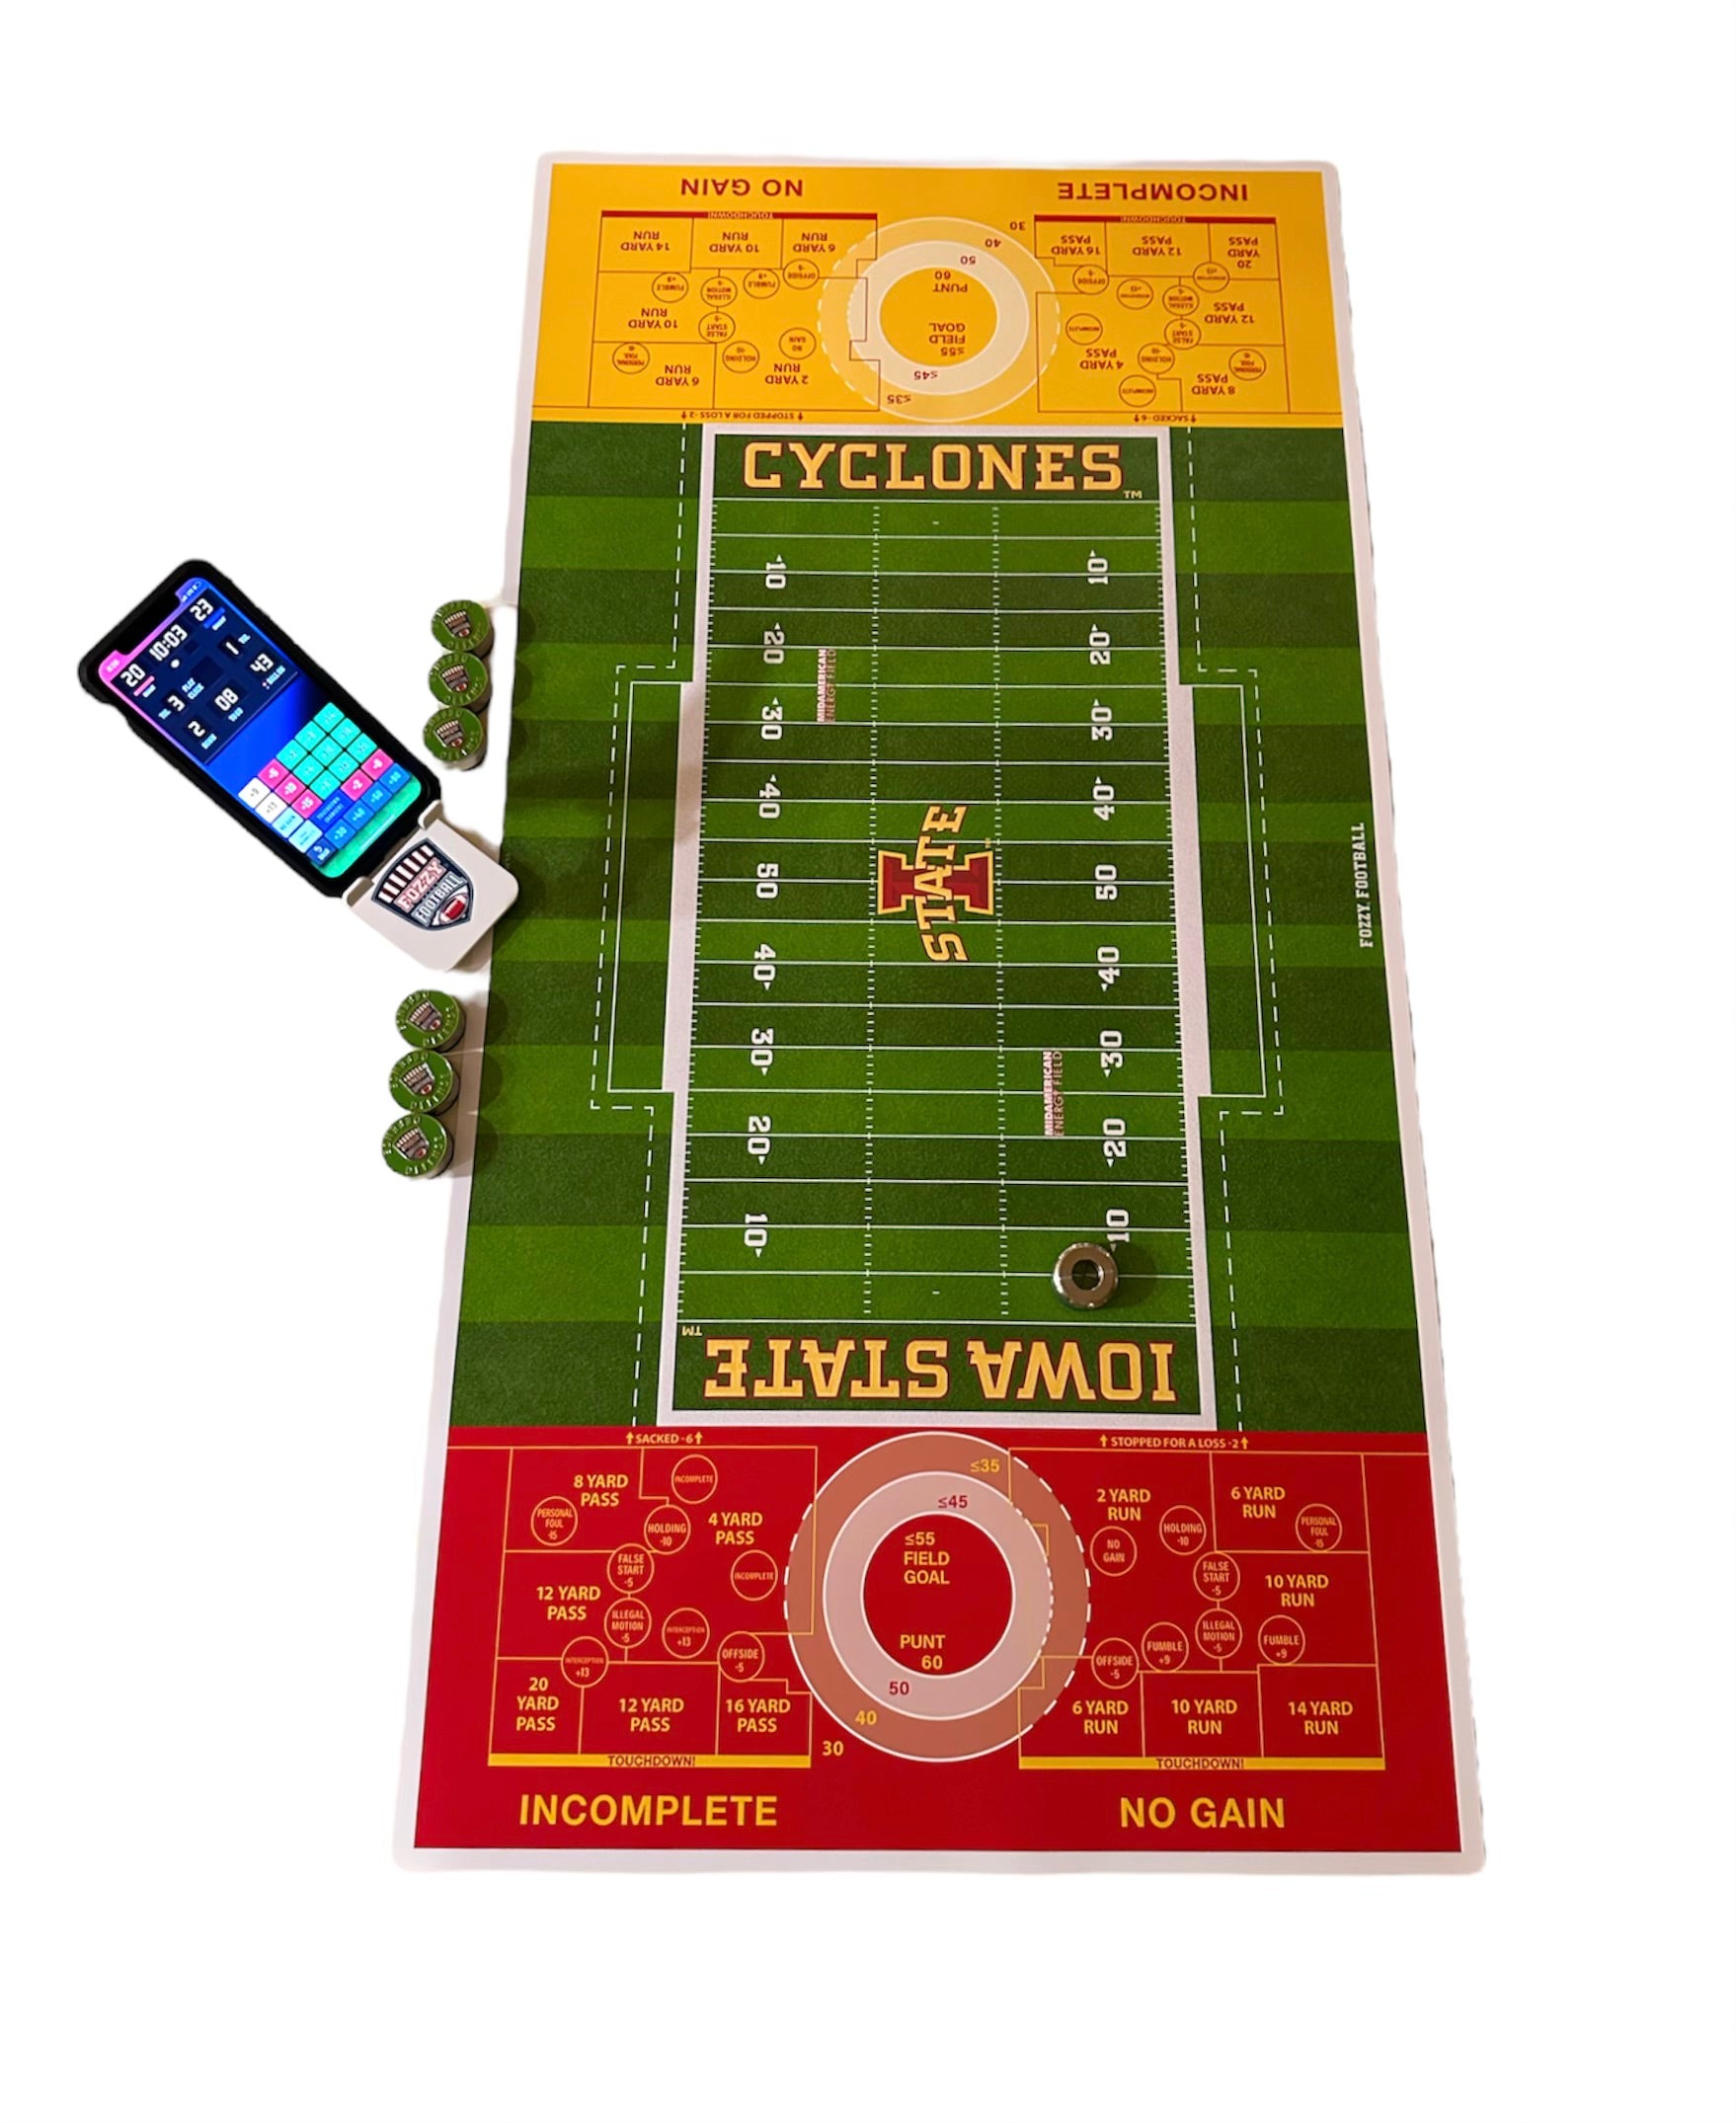 Electric Football and the NFL Team Shop Concept - Electric